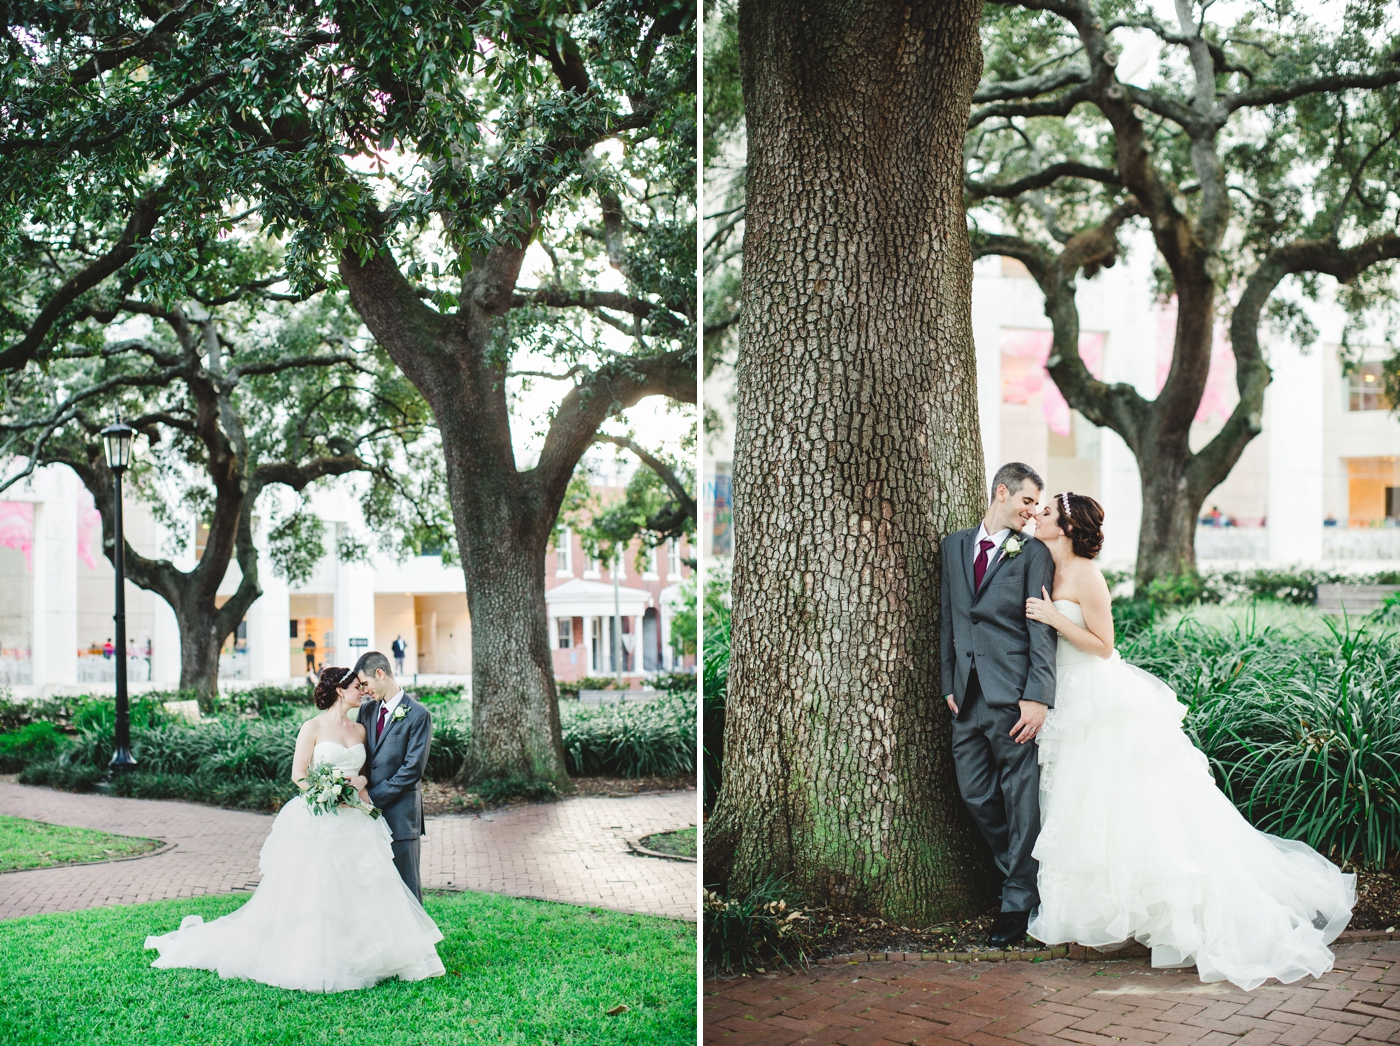 Telfair Square Elopement in Savannah - Izzy and Co.